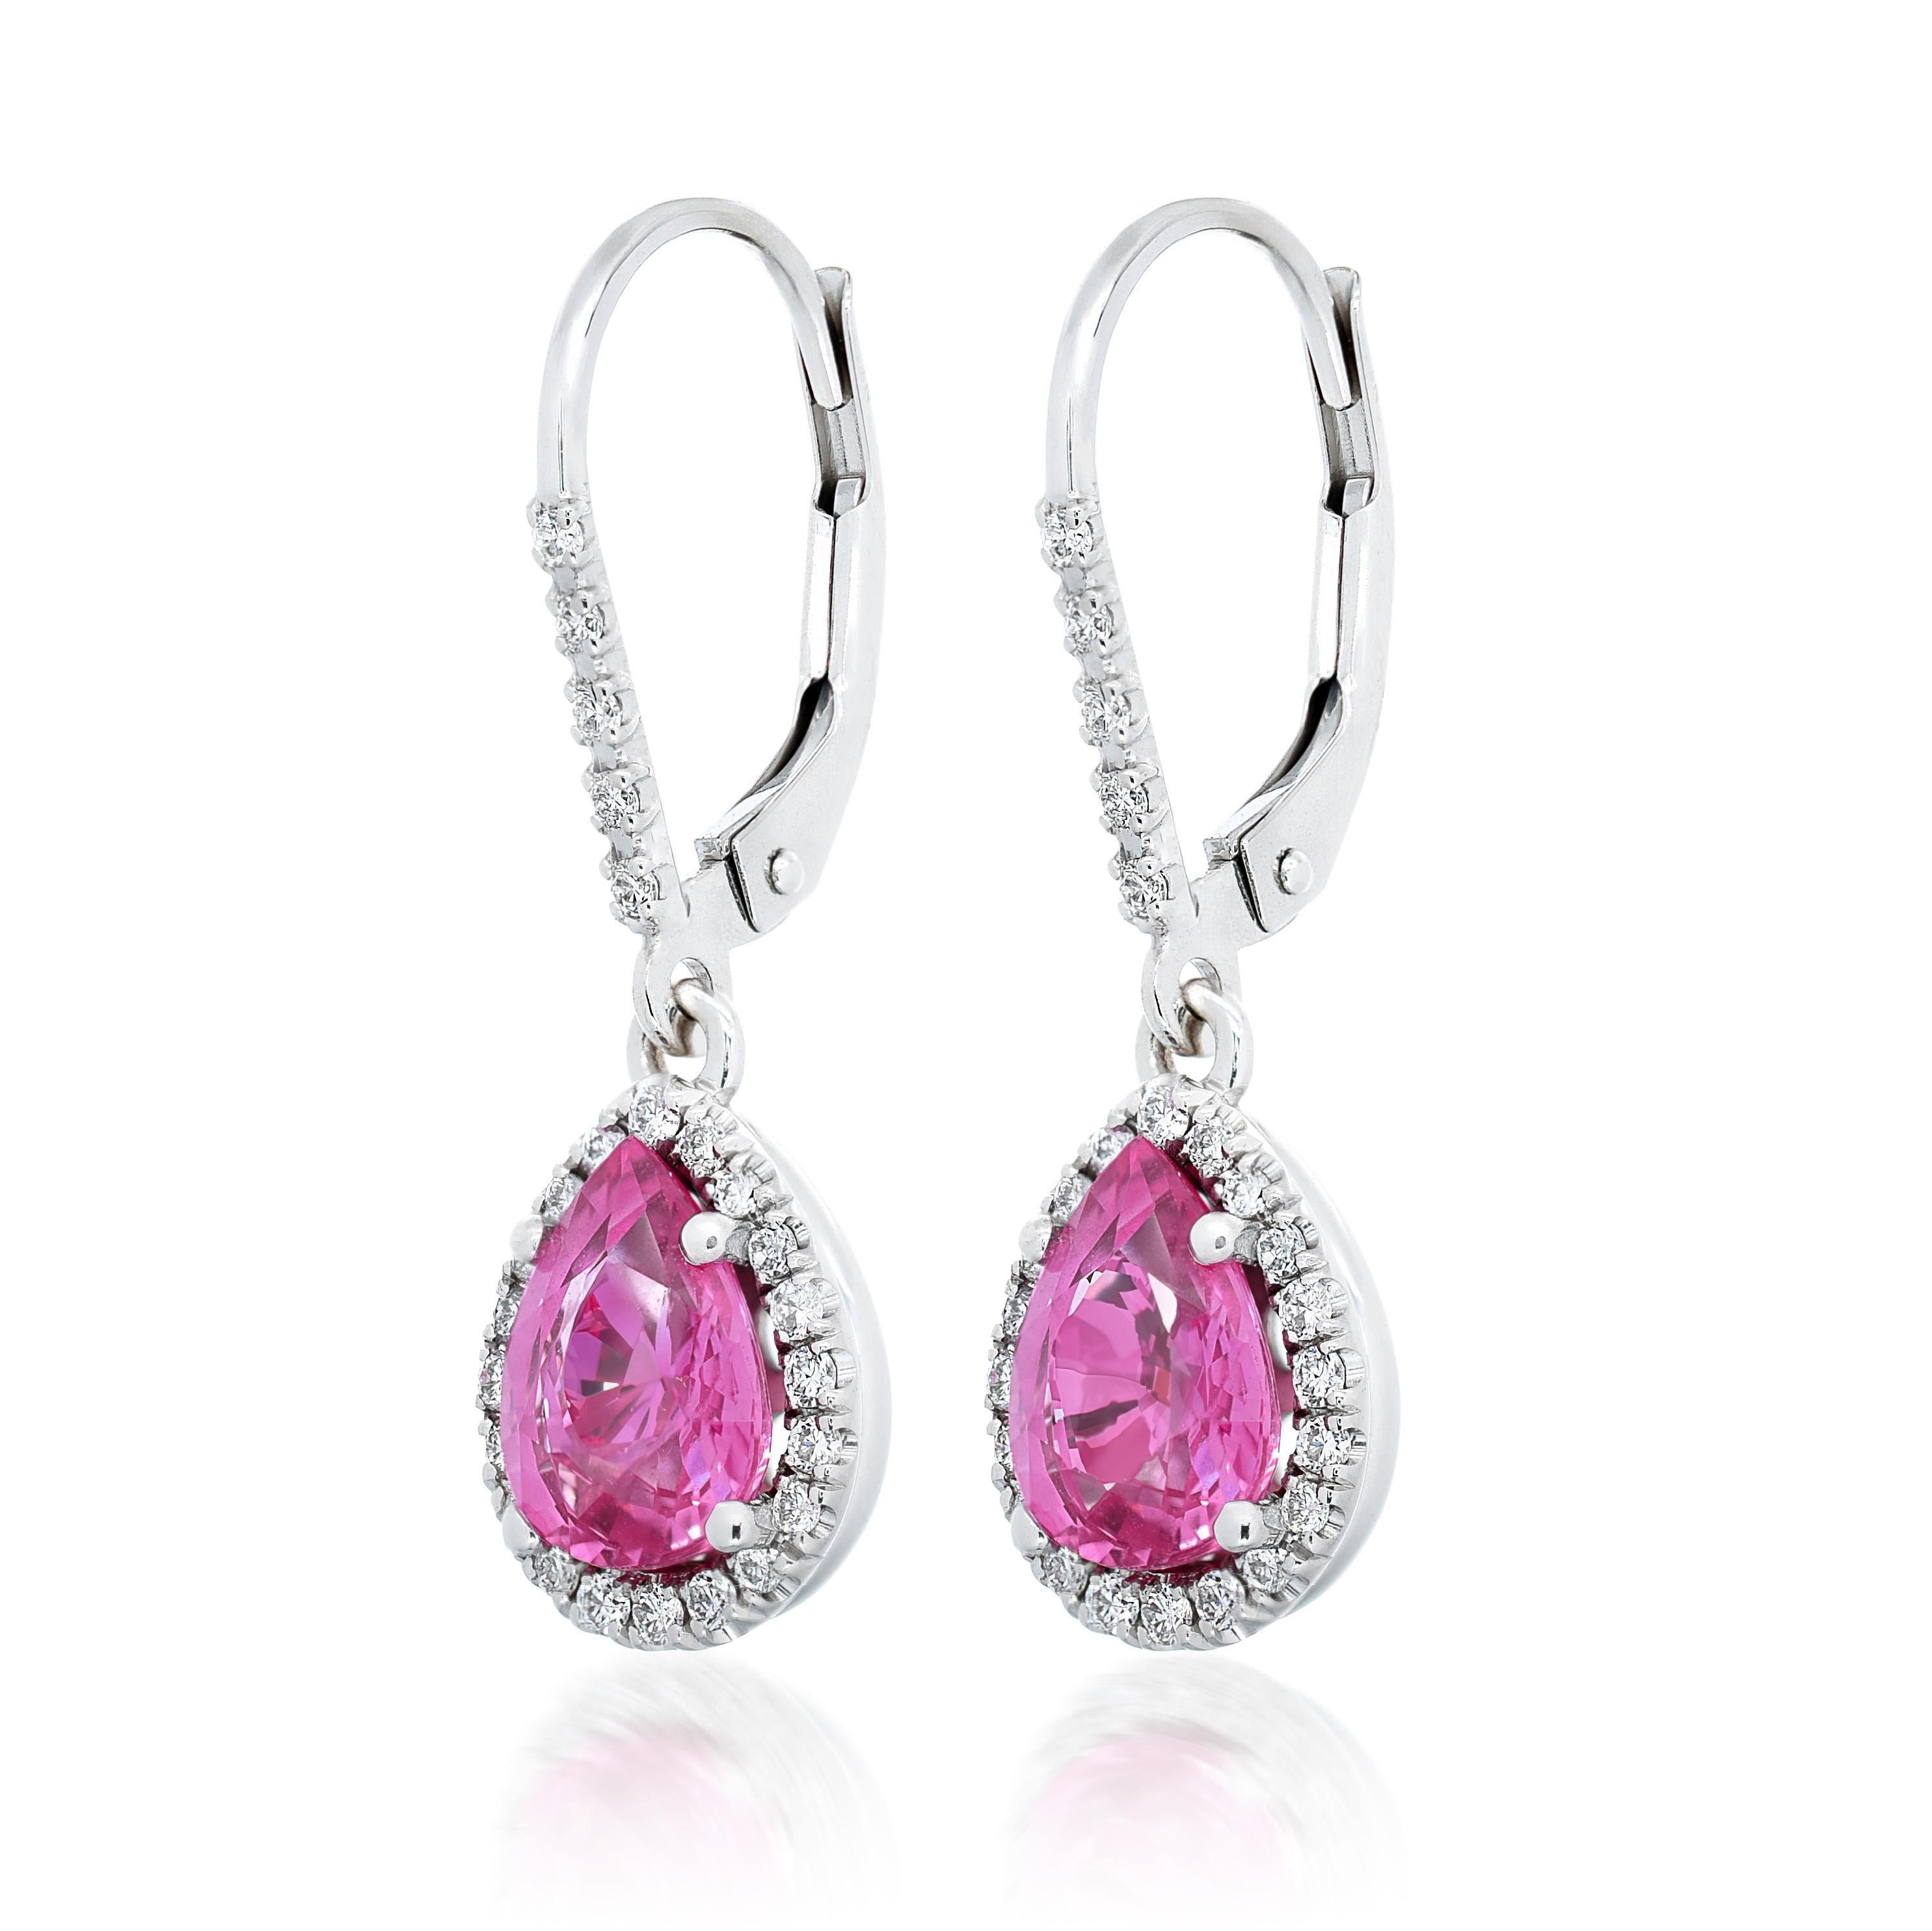 Mixed Cut Certified Natural 2.53 Сts Pink Sapphire Earrings set in 14 KWG with Diamonds